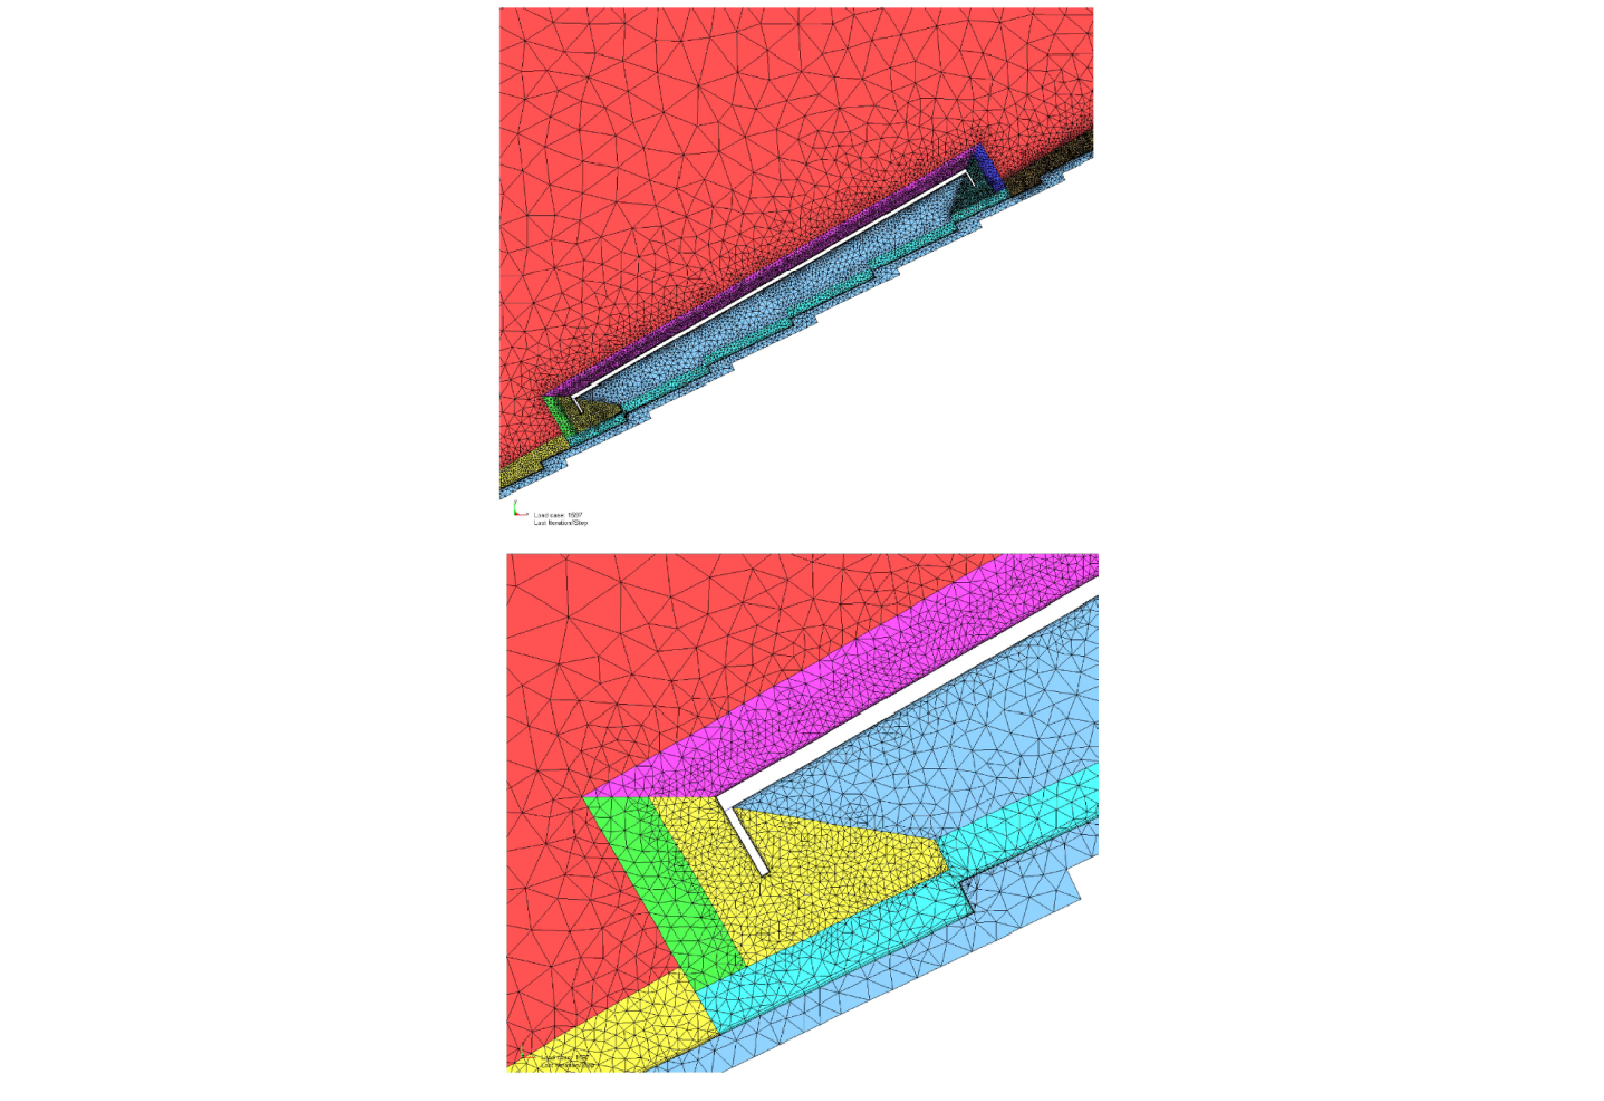 CFD meshing control used to capture the pressure loading over the roof and panel system